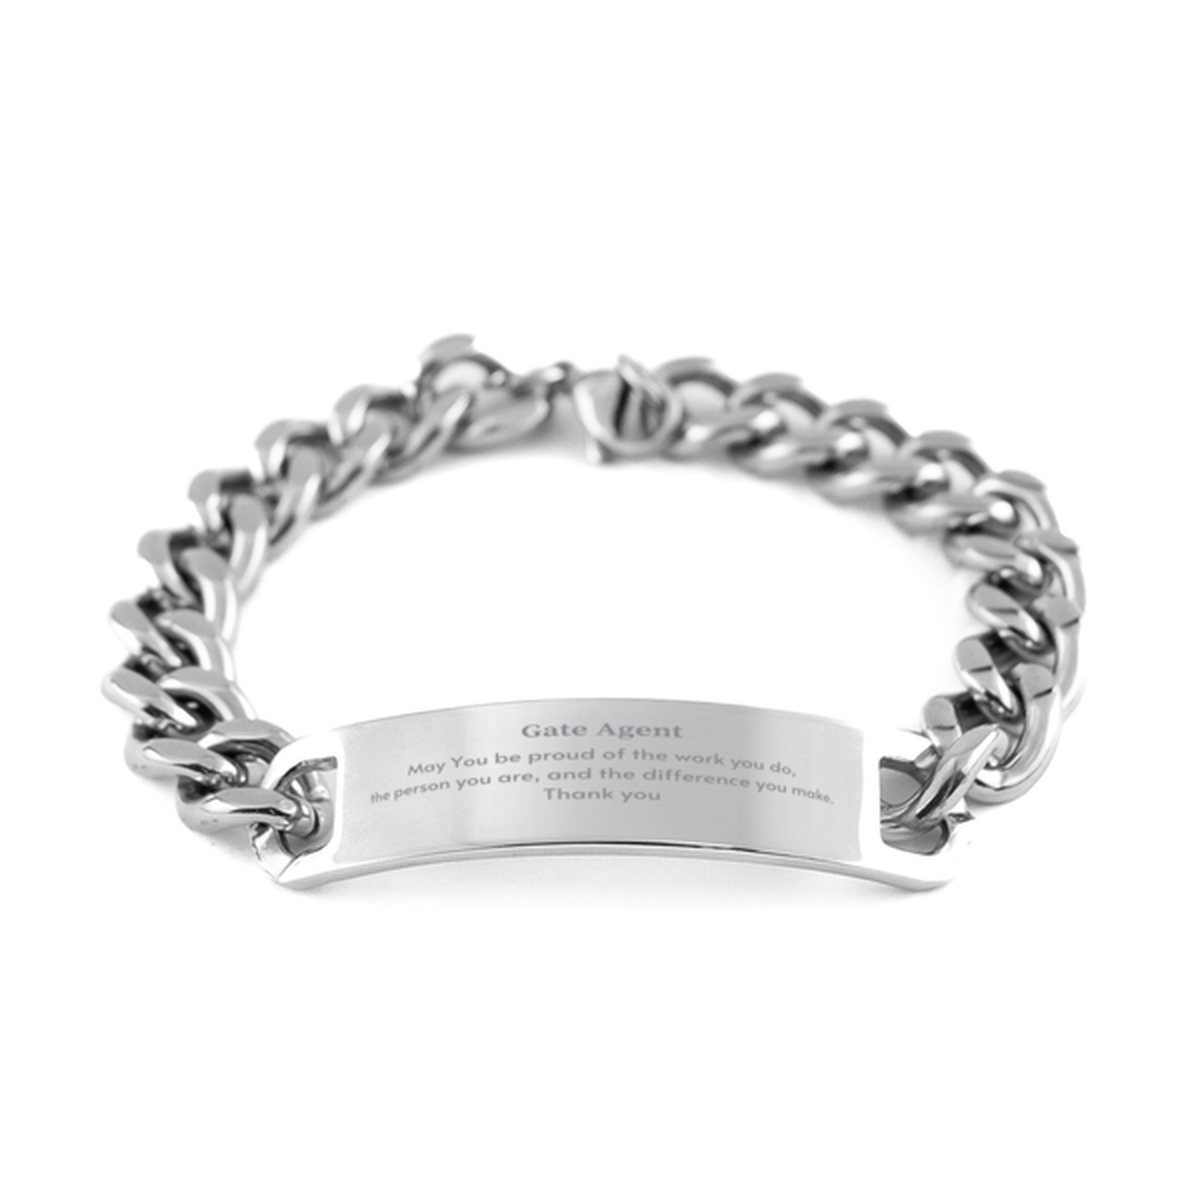 Heartwarming Cuban Chain Stainless Steel Bracelet Retirement Coworkers Gifts for Gate Agent, Gate Agent May You be proud of the work you do, the person you are Gifts for Boss Men Women Friends